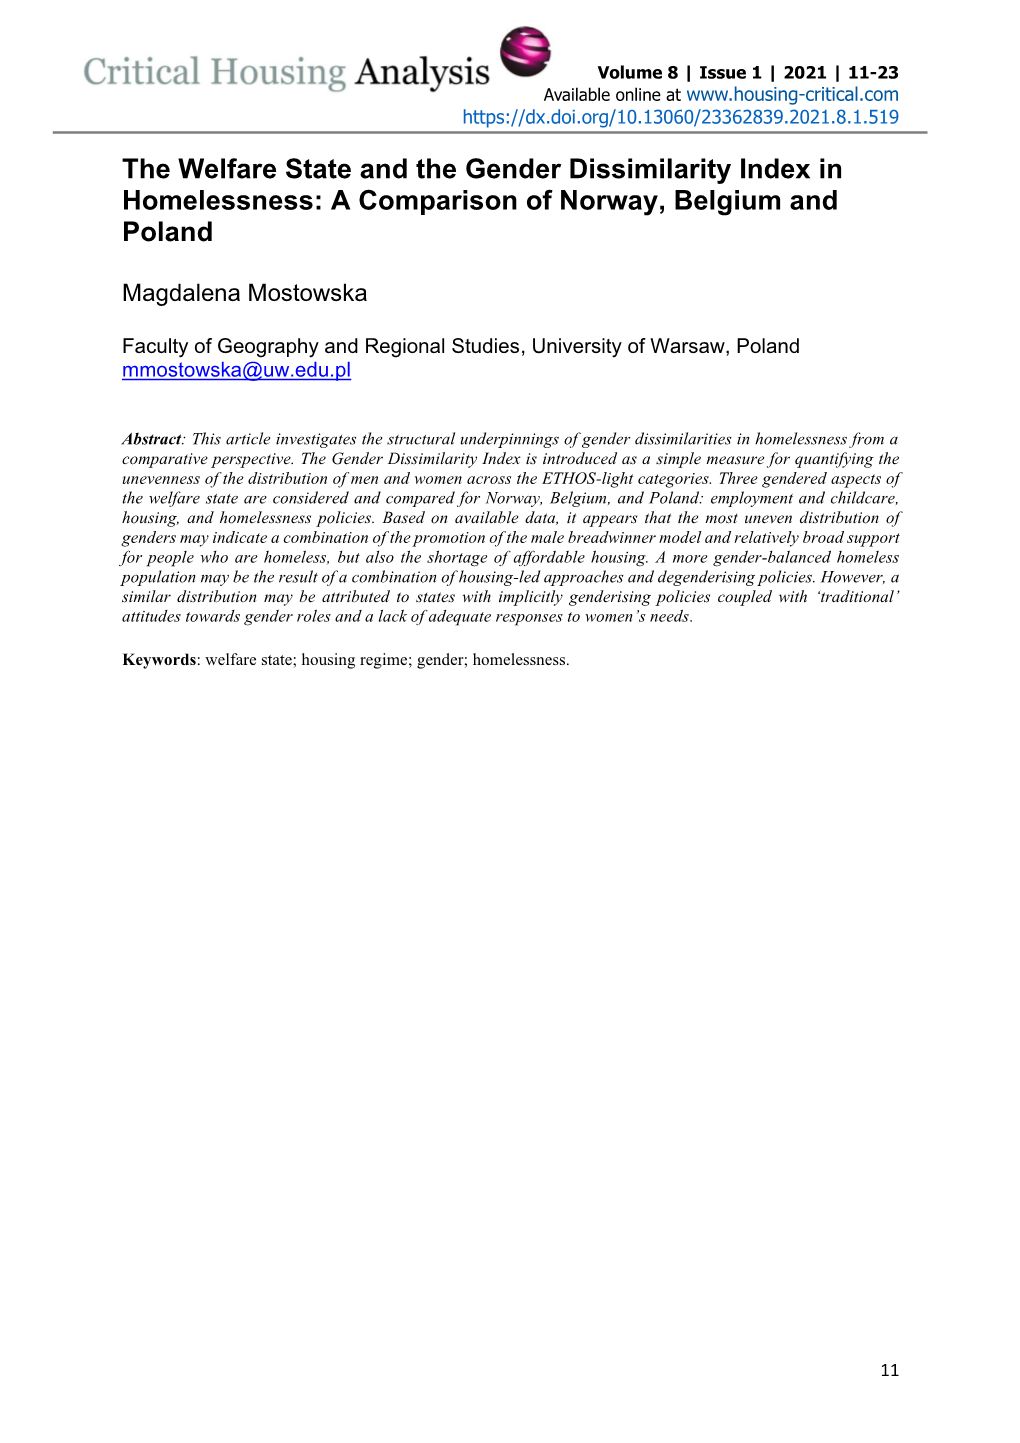 The Welfare State and the Gender Dissimilarity Index in Homelessness: a Comparison of Norway, Belgium and Poland